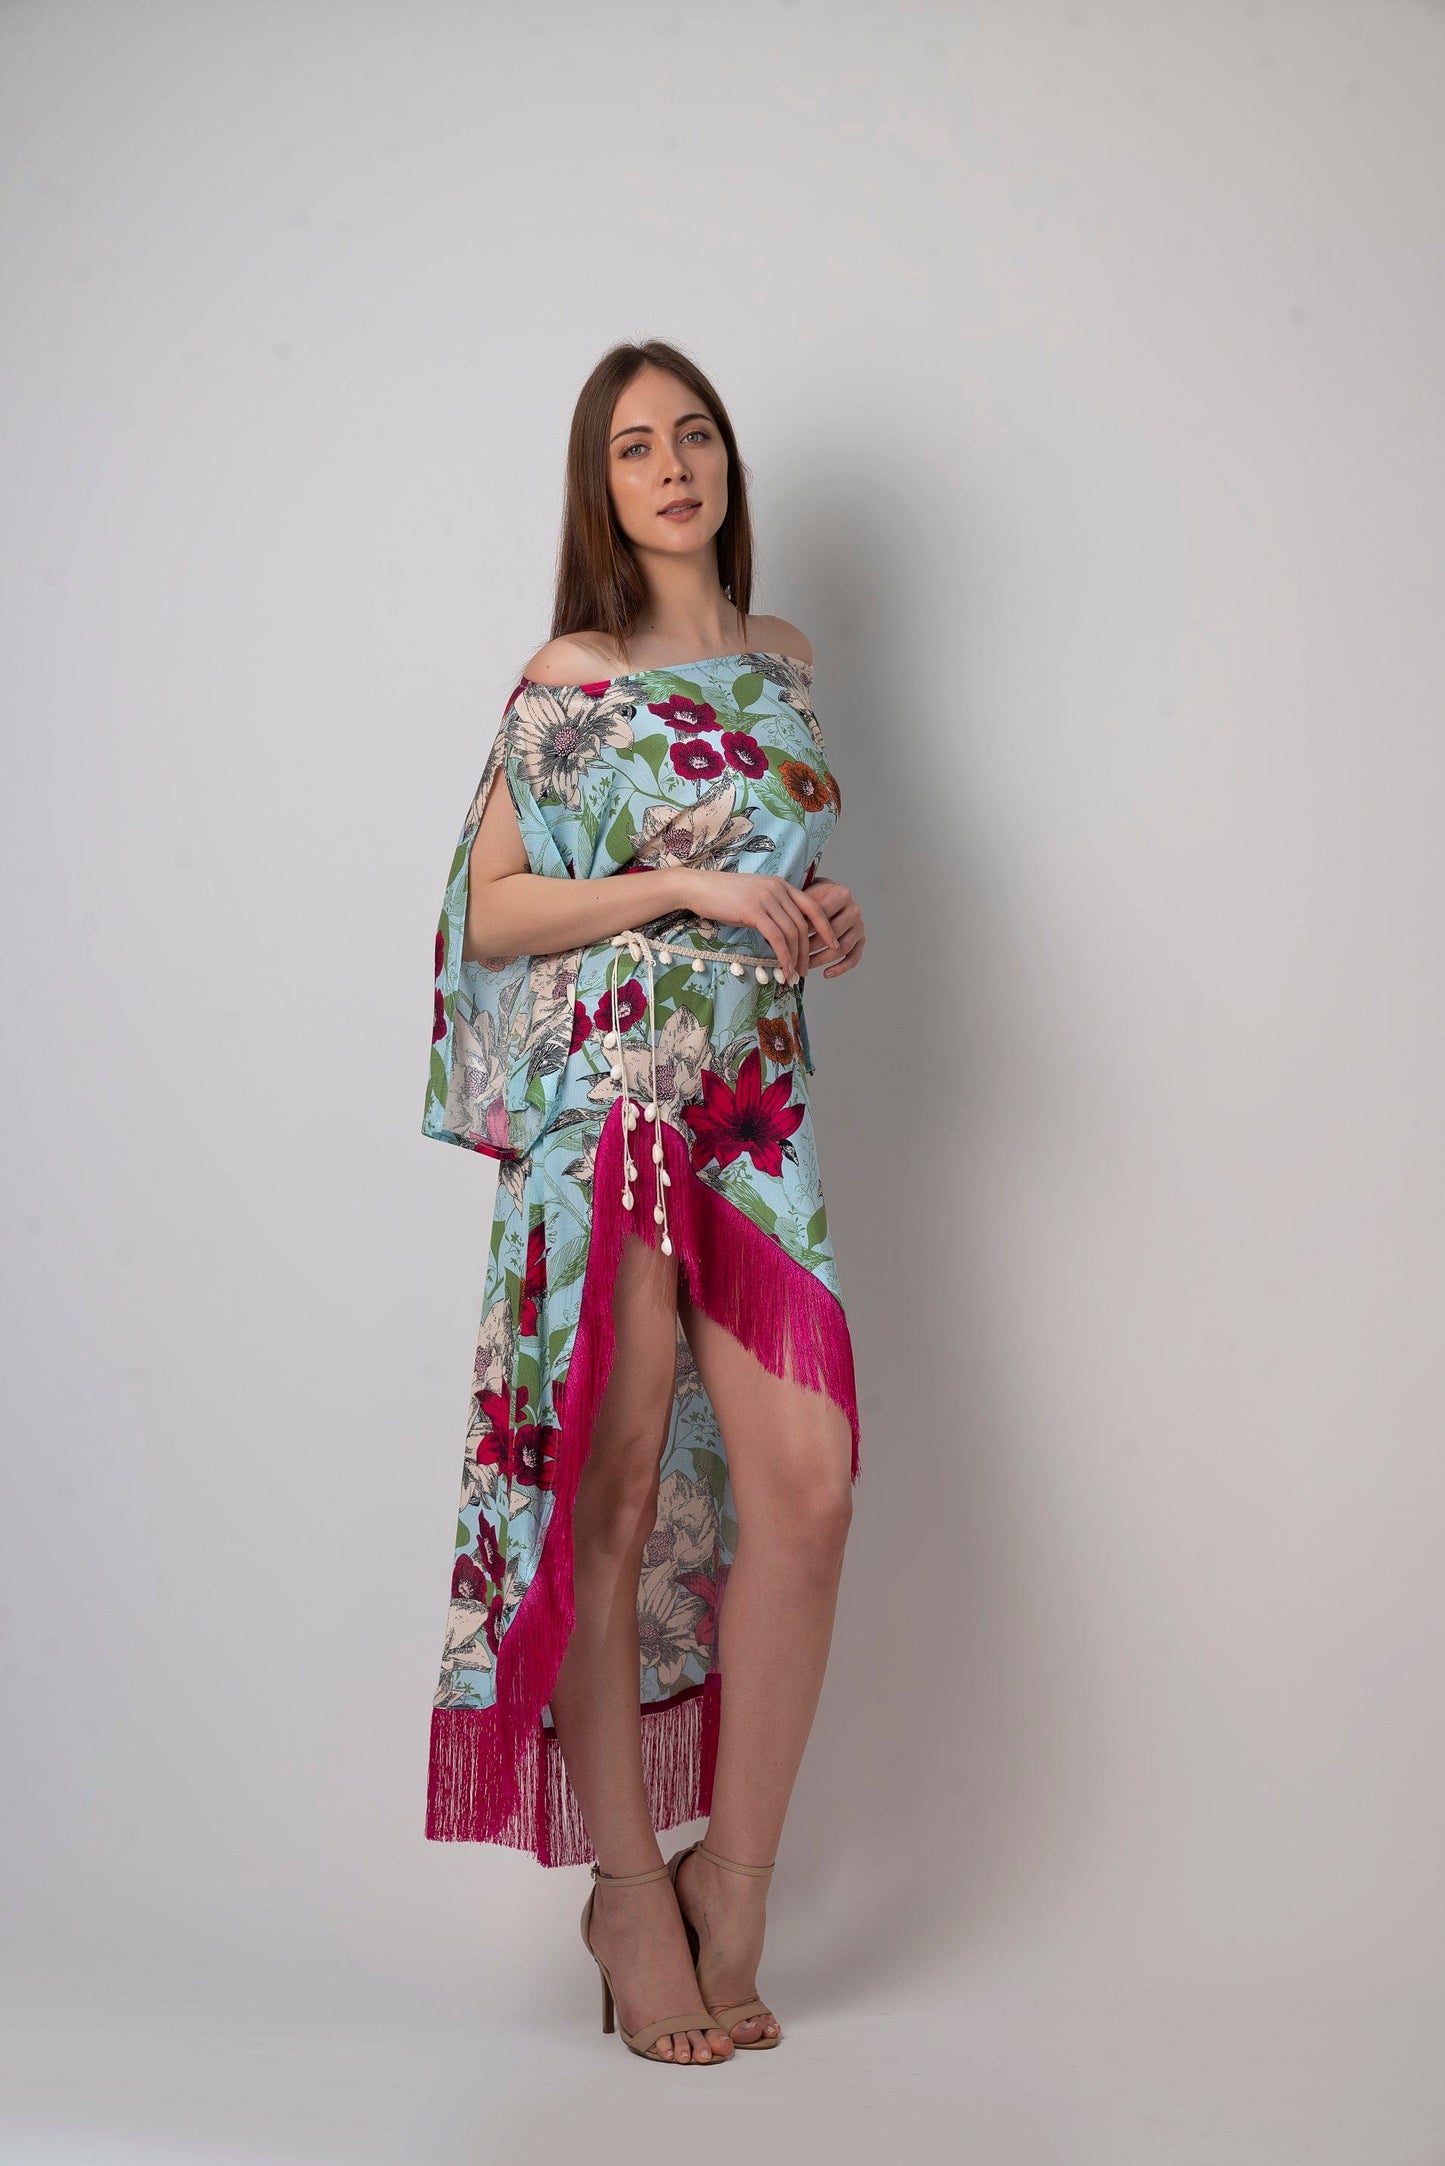 This one-shoulder floral kaftan dress is made of soft and lightweight viscose and is perfect for hot summer days by the beach